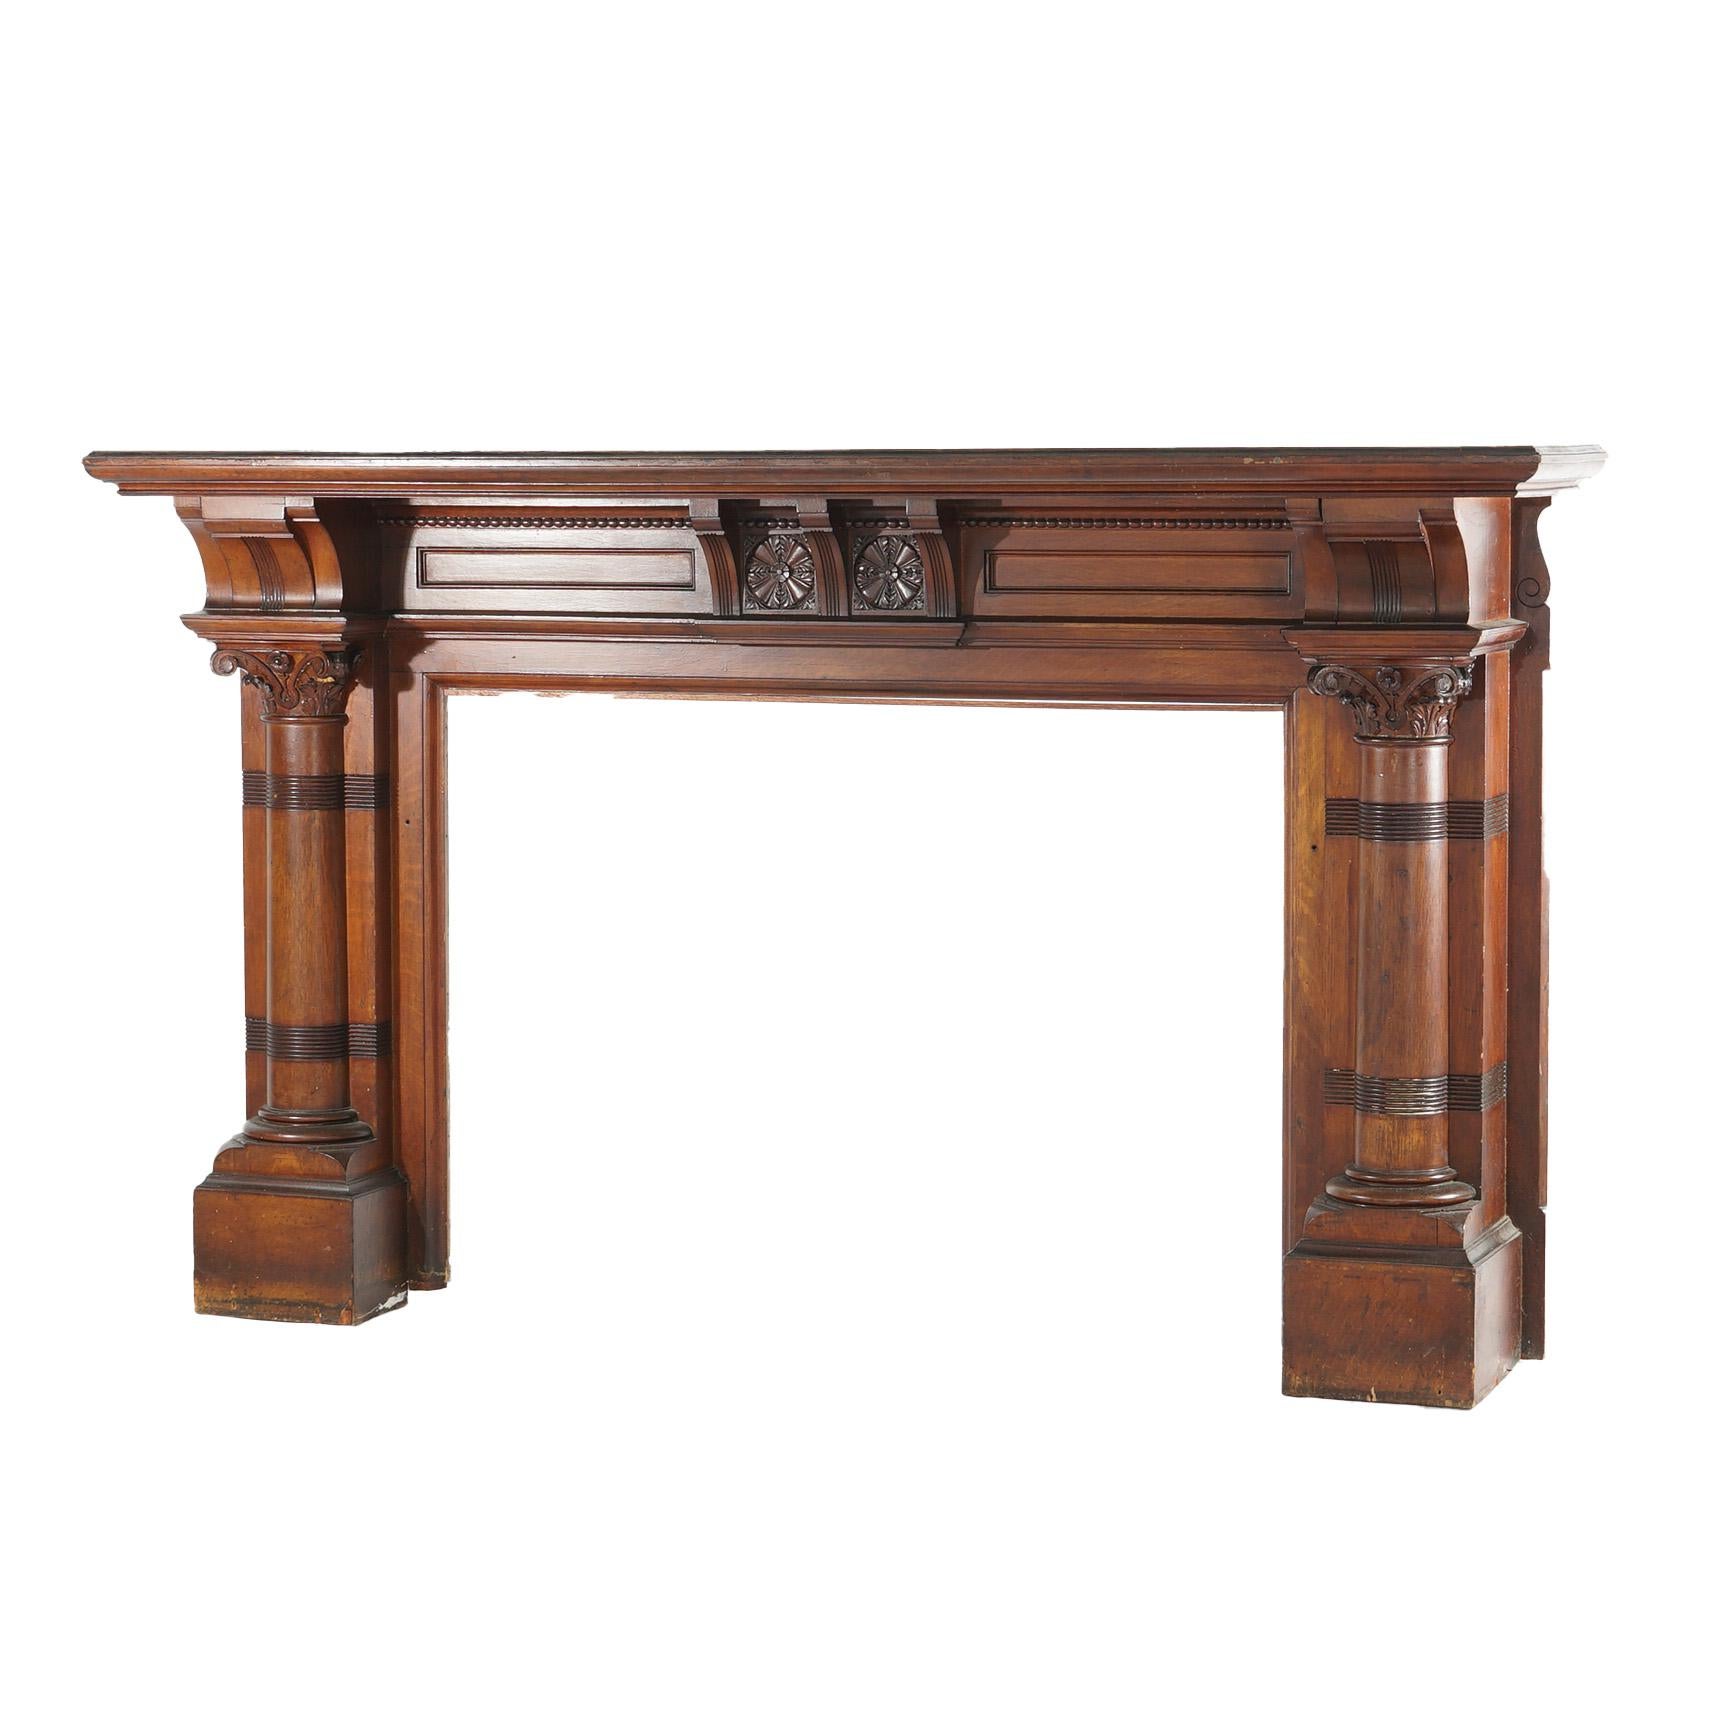 ***Ask About Reduced In-House Delivery Rates - Reliable Professional Service & Fully Insured***
Antique R J Horner Neoclassical Oversized Oak Fireplace Mantle with Flanking Corinthian Columns & Over Mantel Mirror with Carved Foliate Elements,